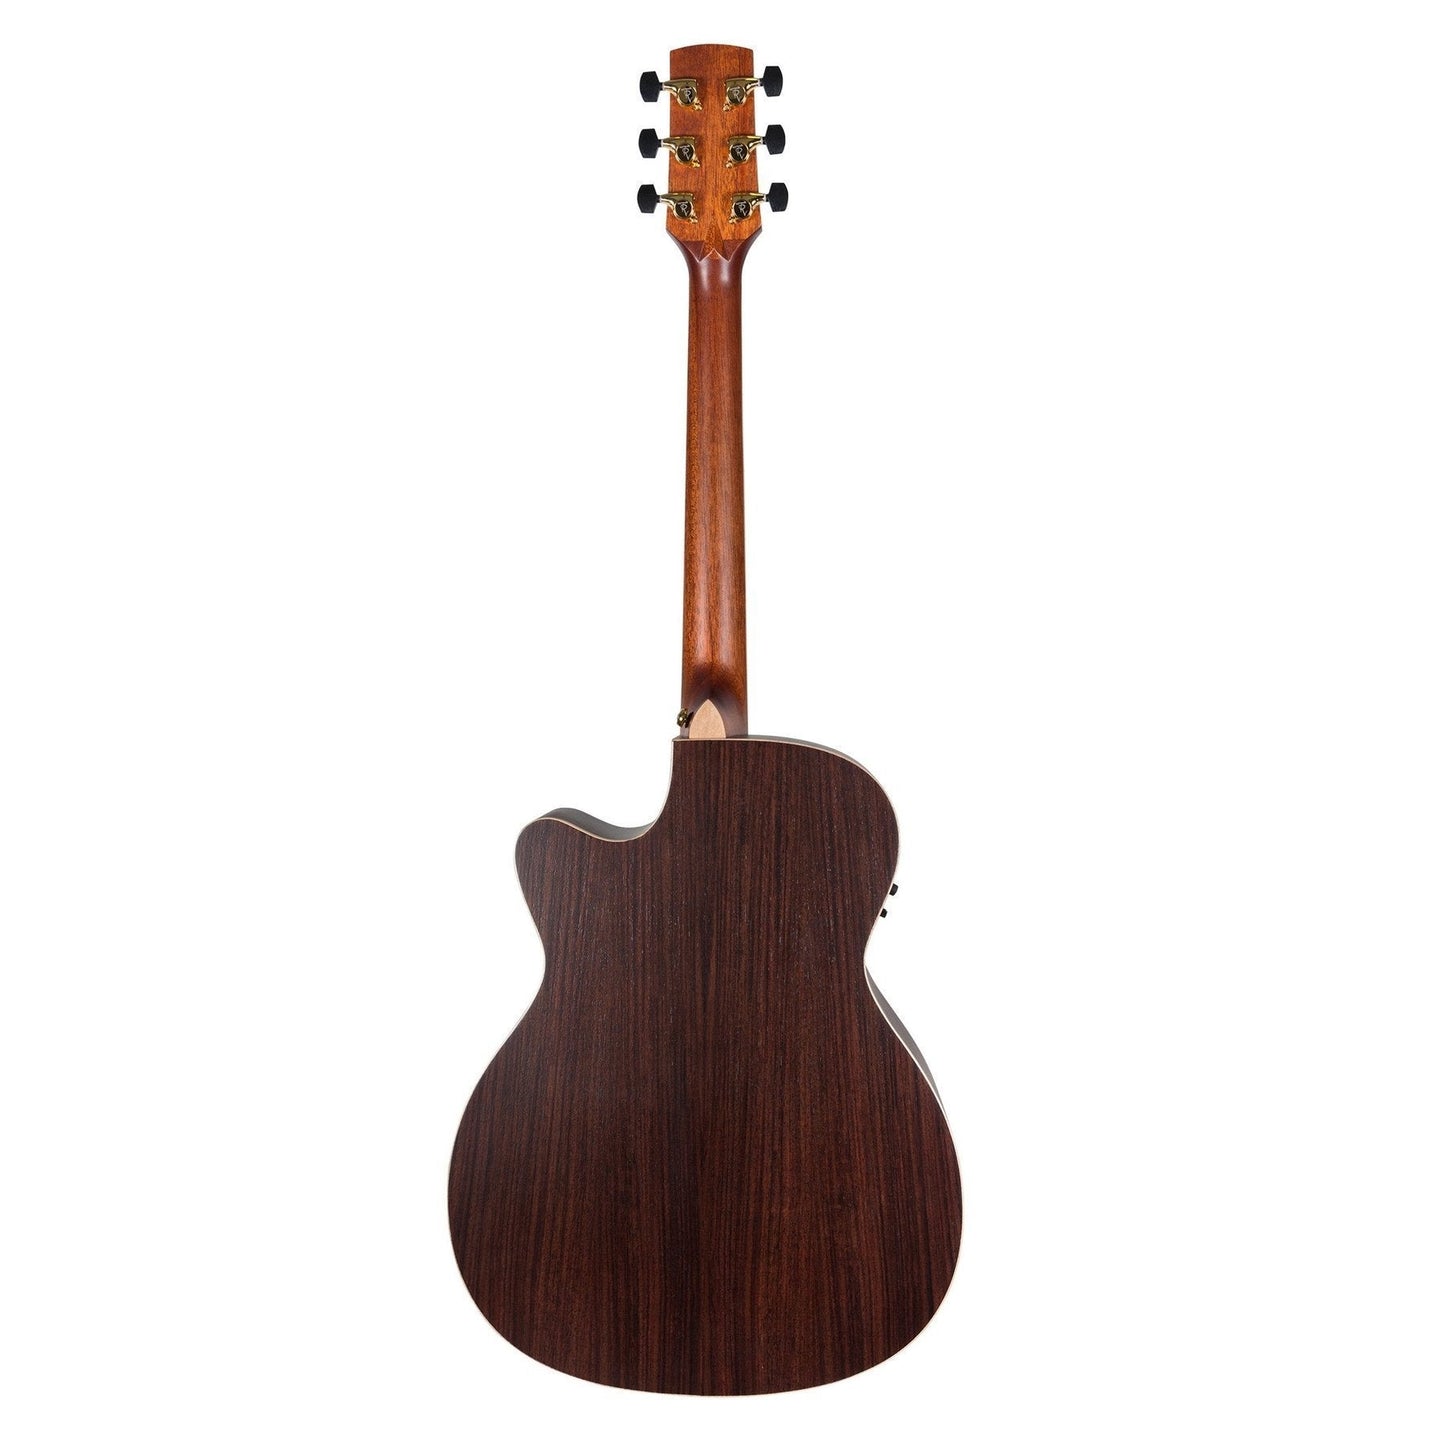 Timberidge '3 Series' Spruce Solid Top Acoustic-Electric Small Body Cutaway Guitar (Natural Satin)